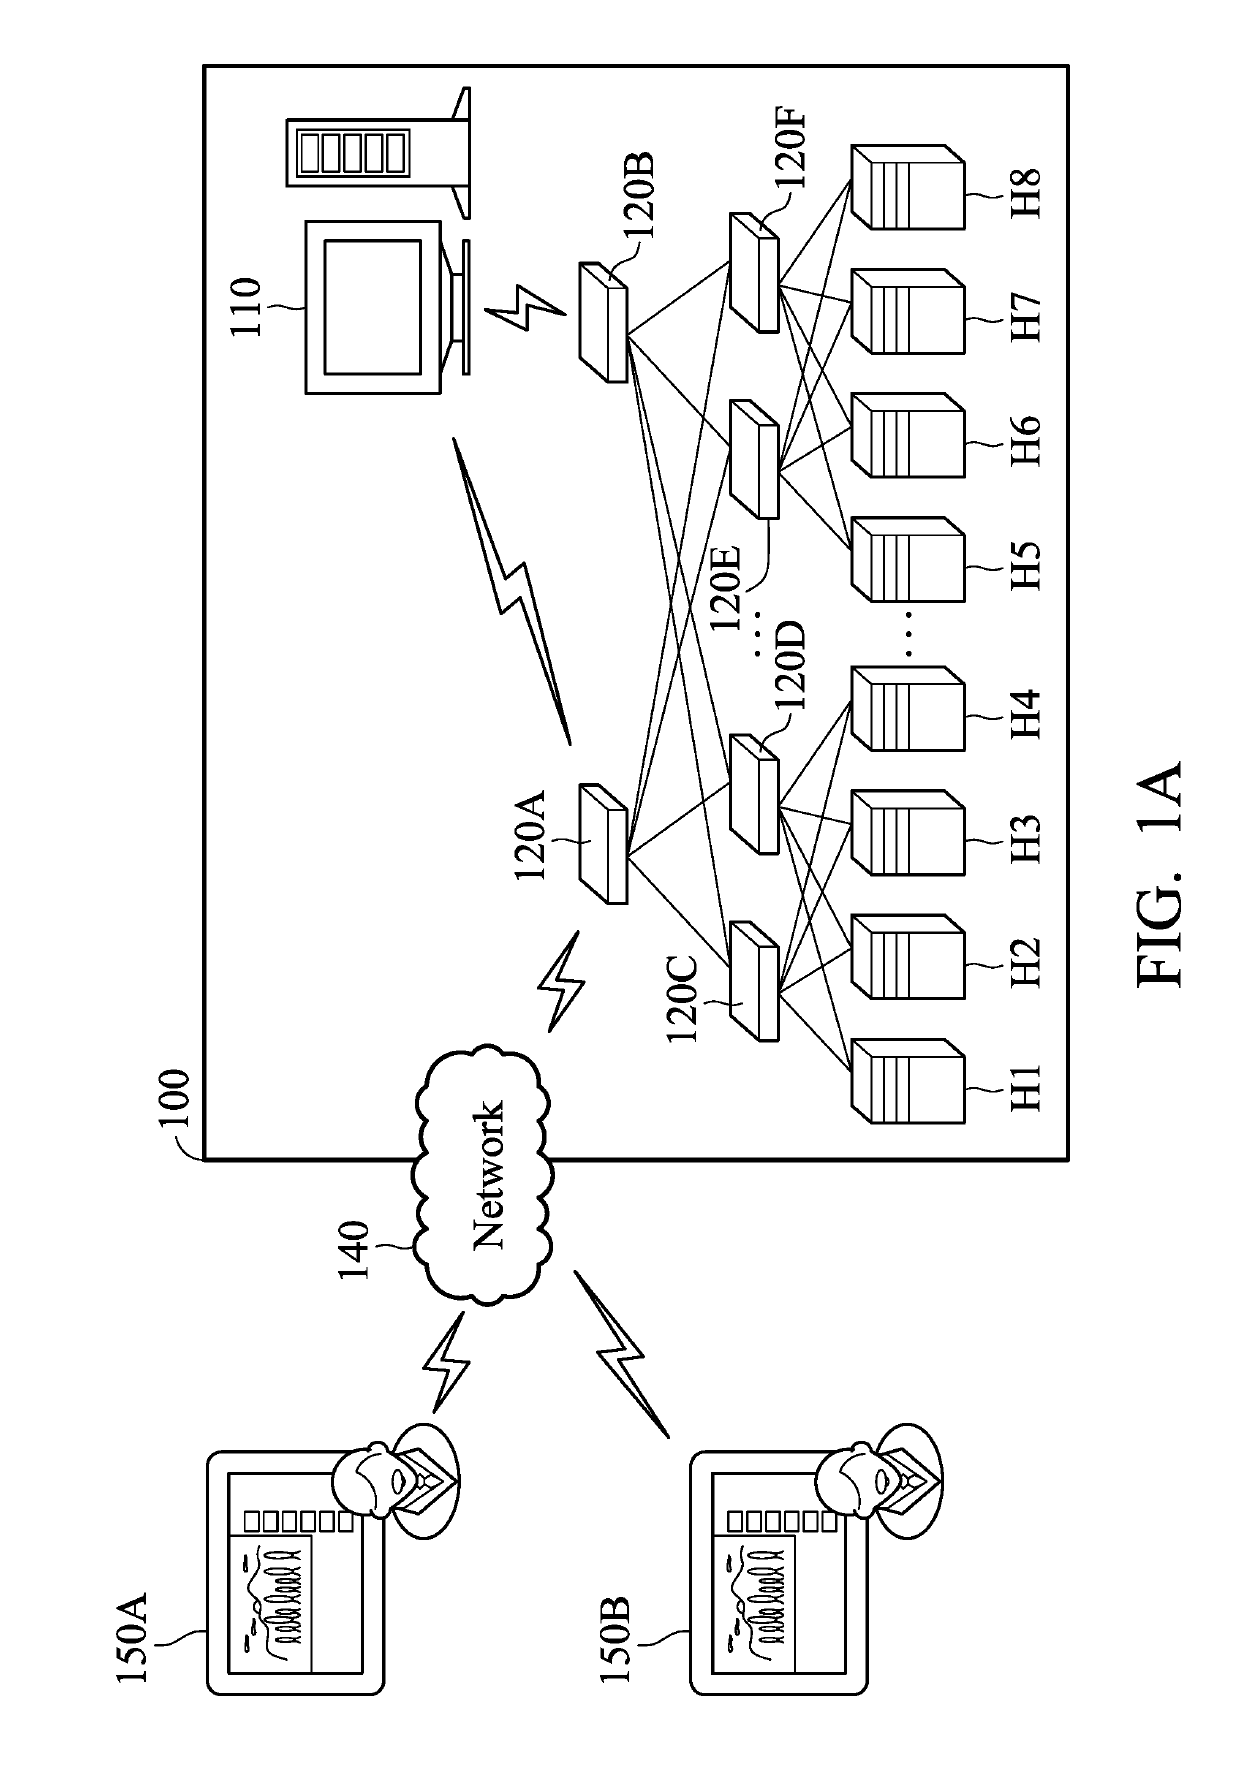 Method and device for monitoring traffic in a network